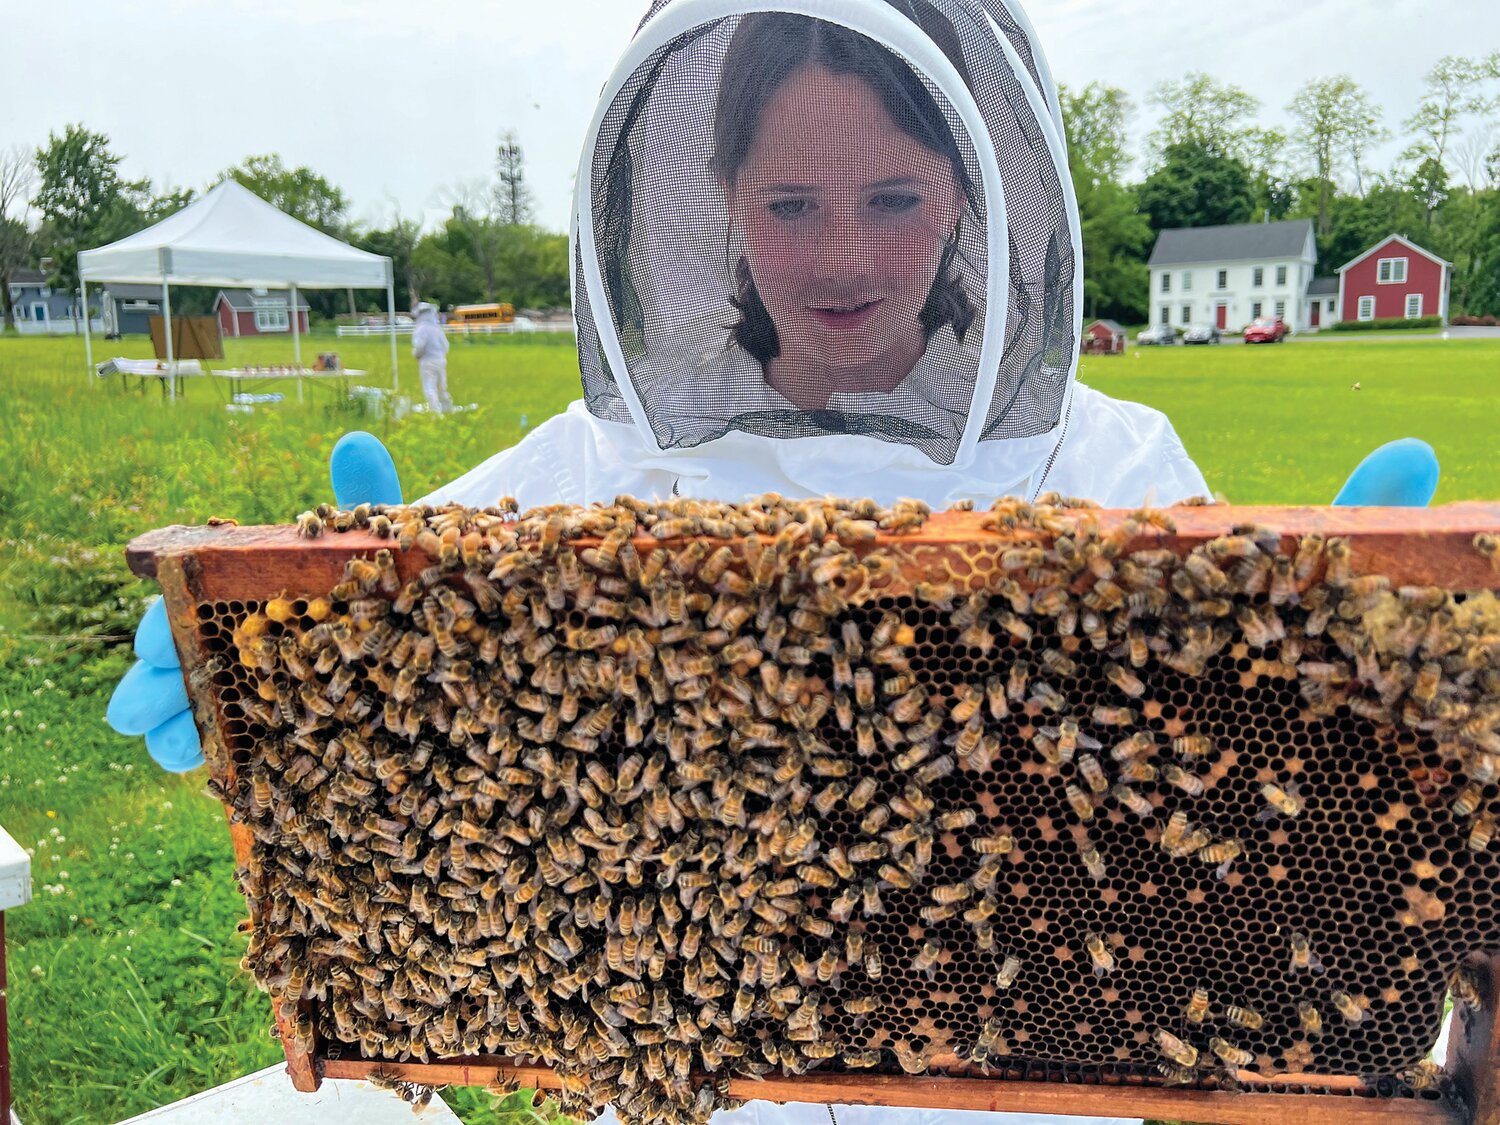 Through NextTerm, The Hun School of Princeton students are exploring how the honey bee is deeply connected to human culture and how humans can work to preserve its existence.